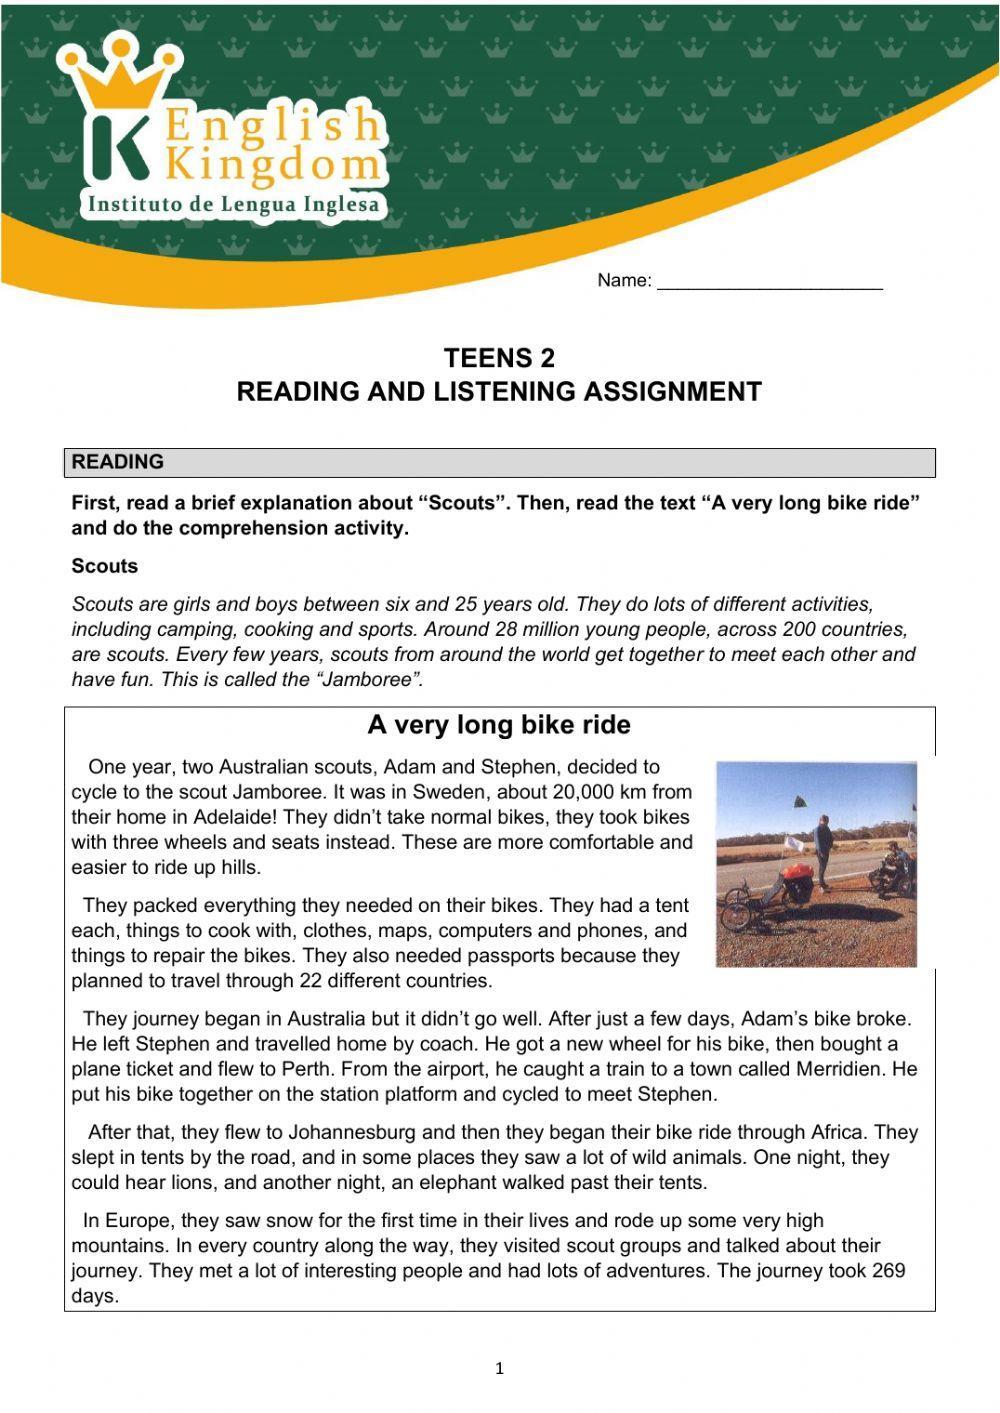 Teens 2-Reading and listening assignment